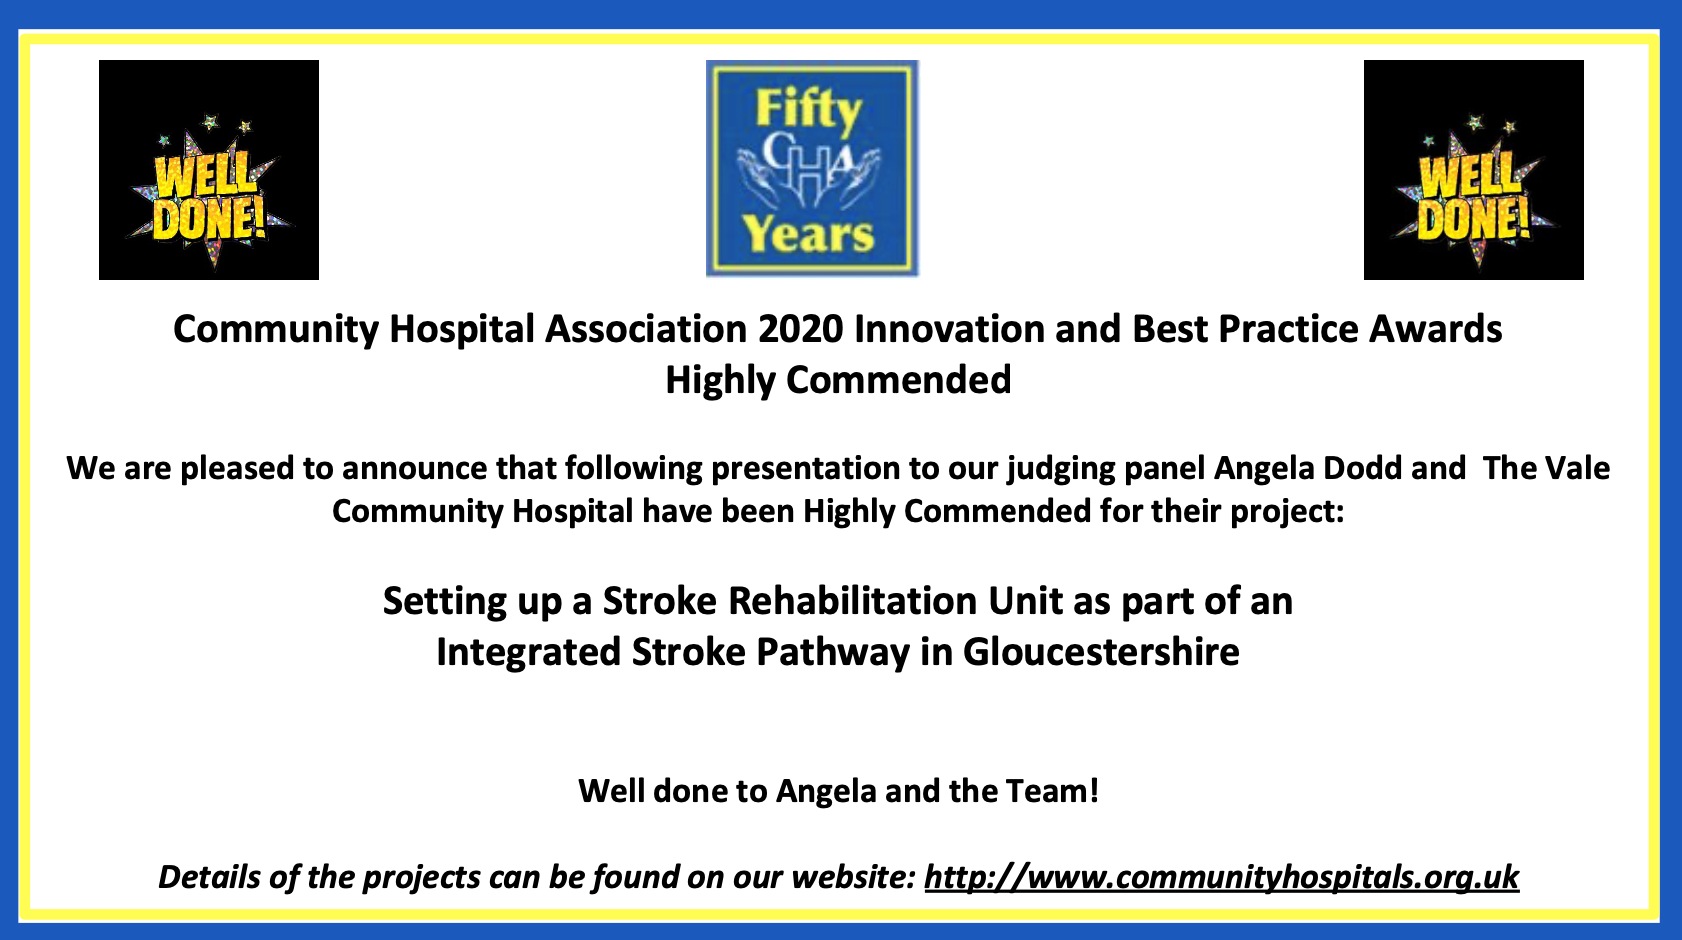 Setting up a Stroke Rehabilitation Unit as part of an Integrated Stroke Pathway in Gloucestershire. featured image